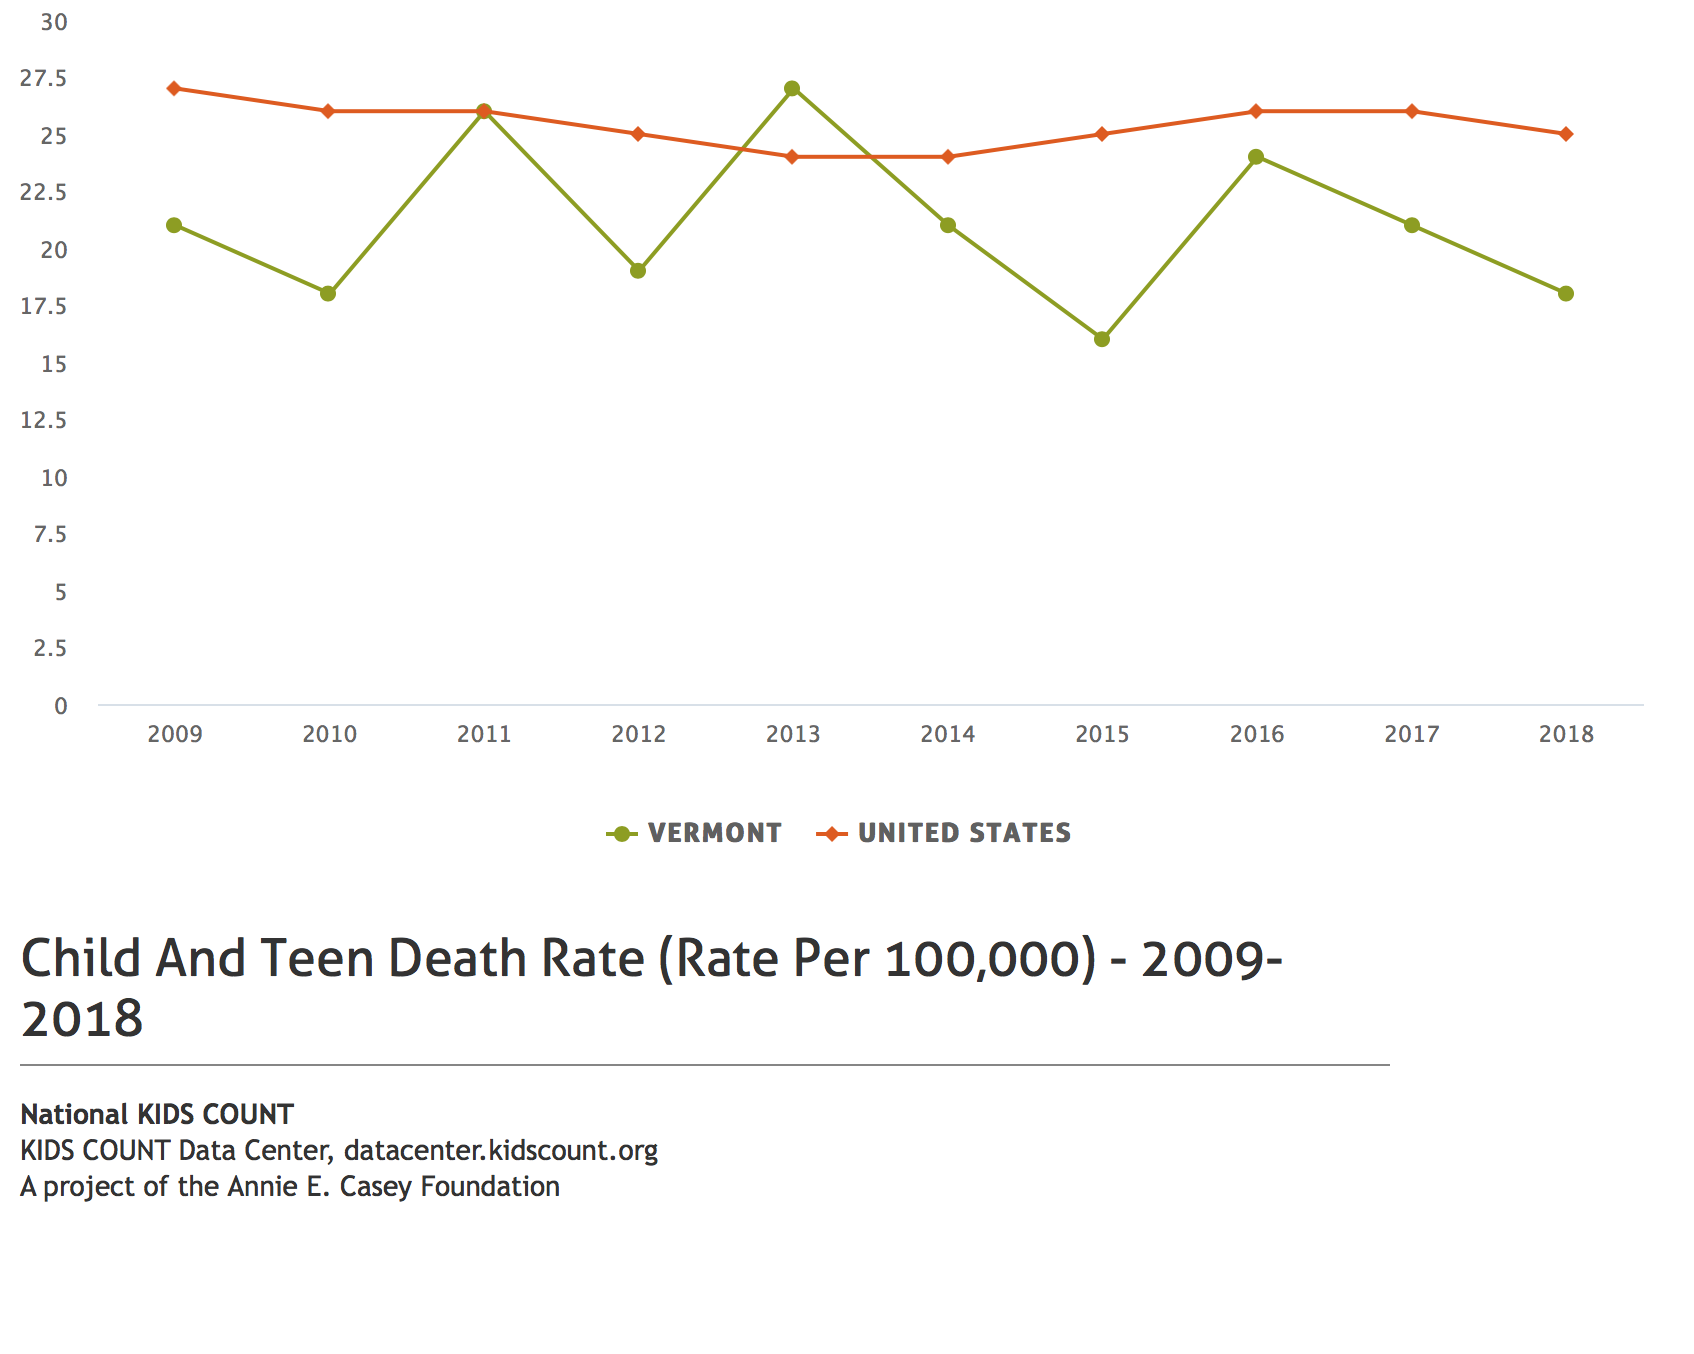 Child and teen deaths per 100,000